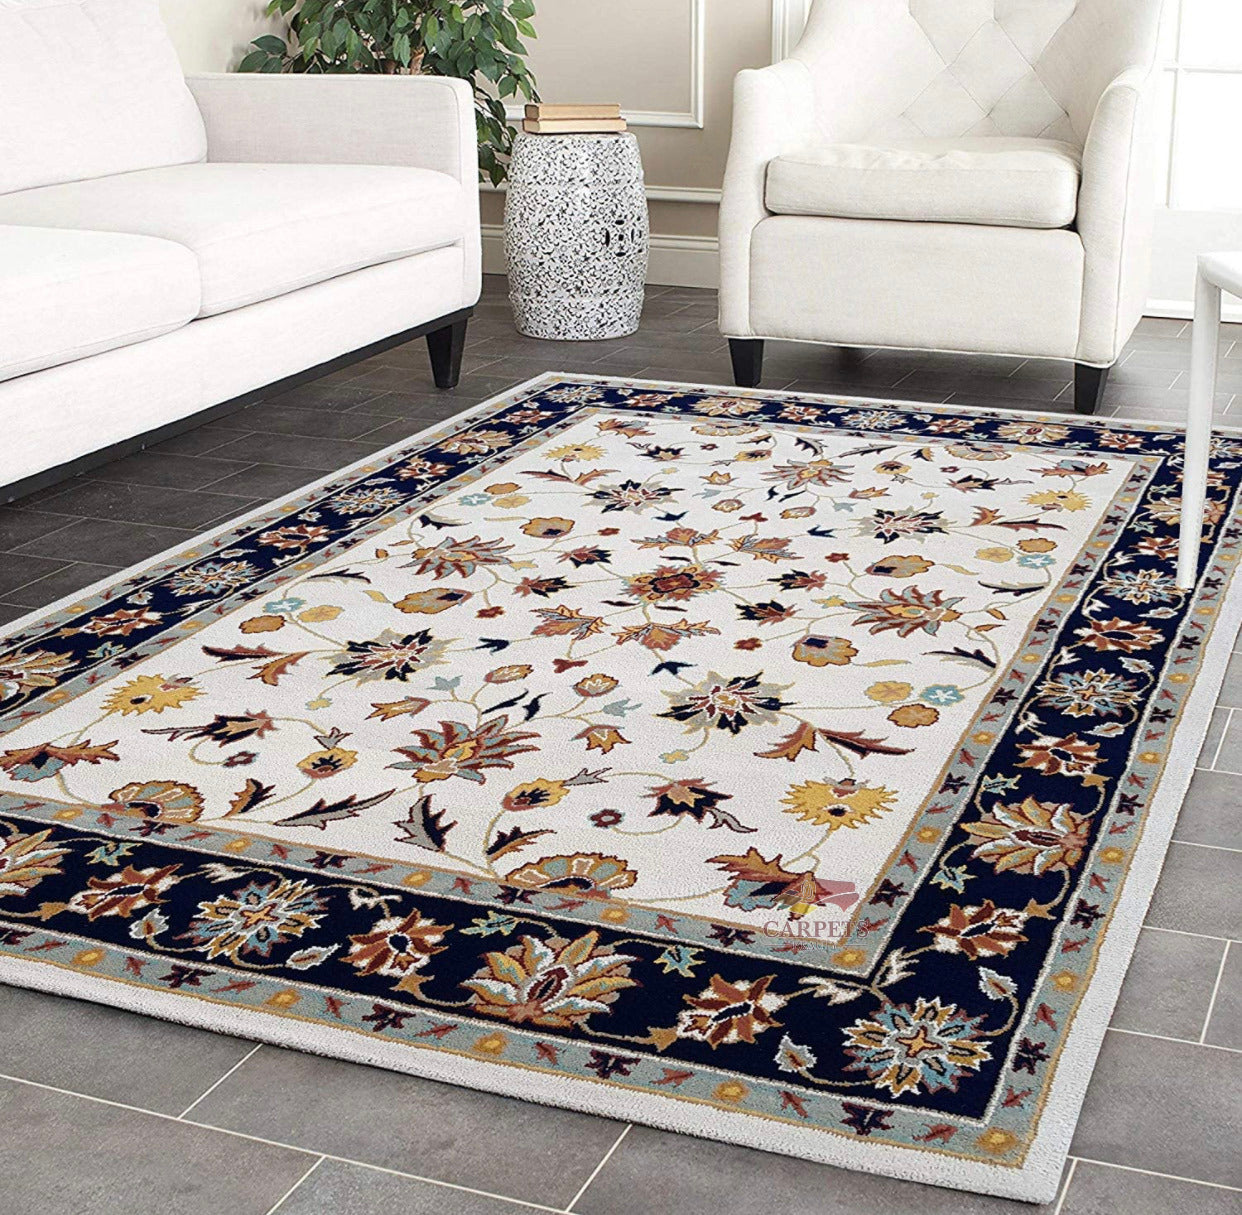 Beautiful multi color persian carpet for your drawing / living rooms